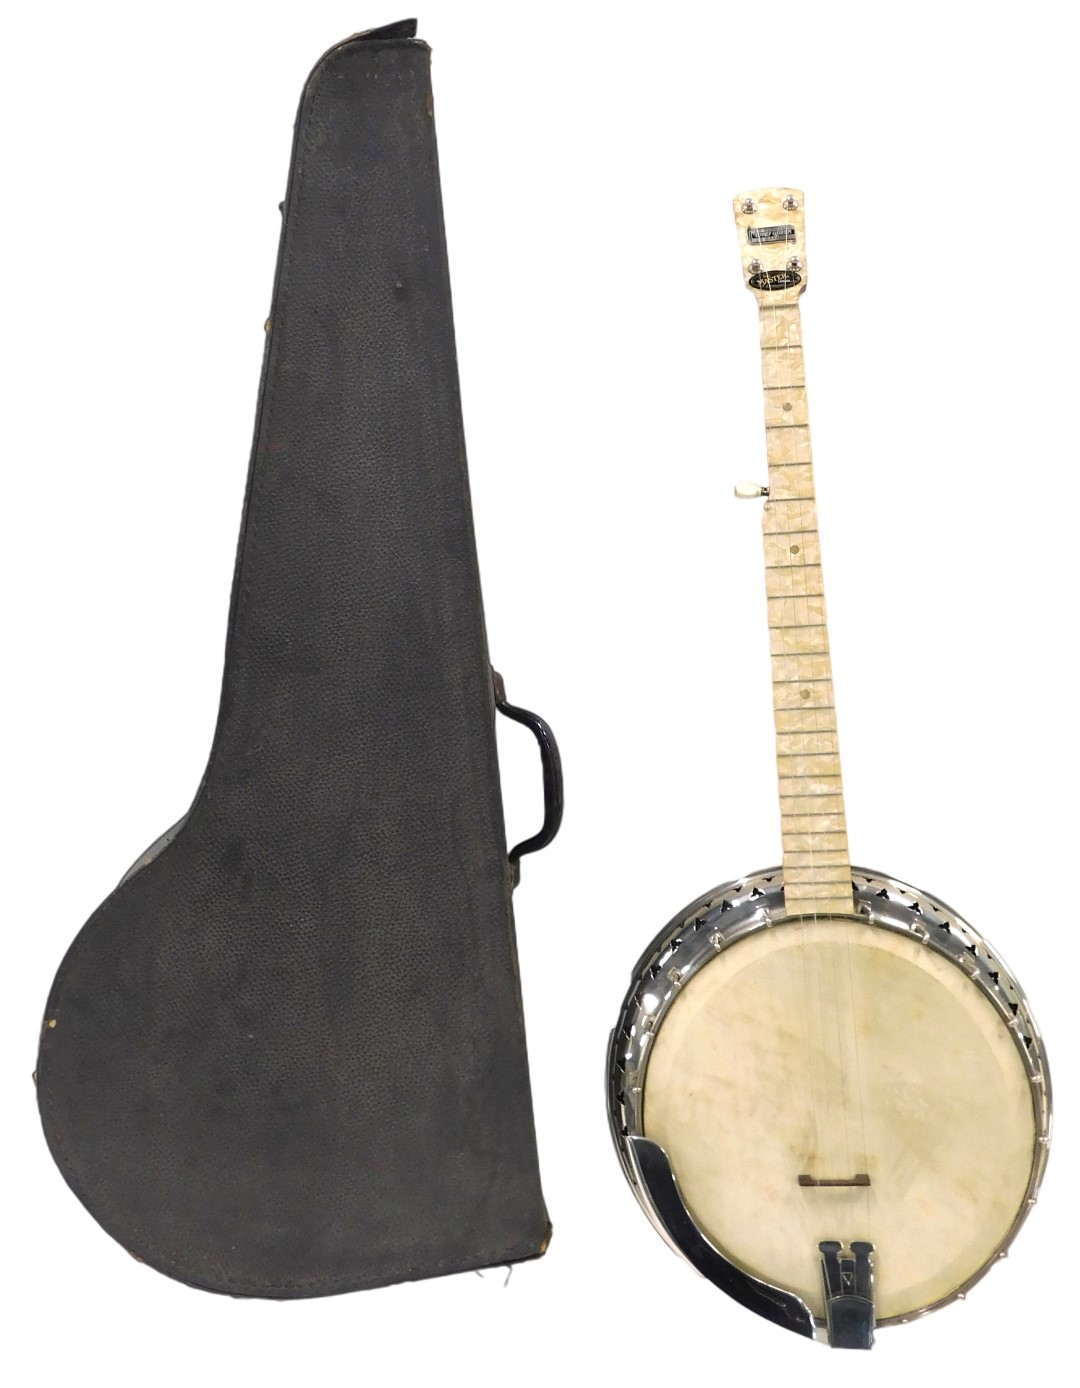 A B&S Master of London Ivory Queen banjo, with a simulated mother of pearl finger board, sides and b